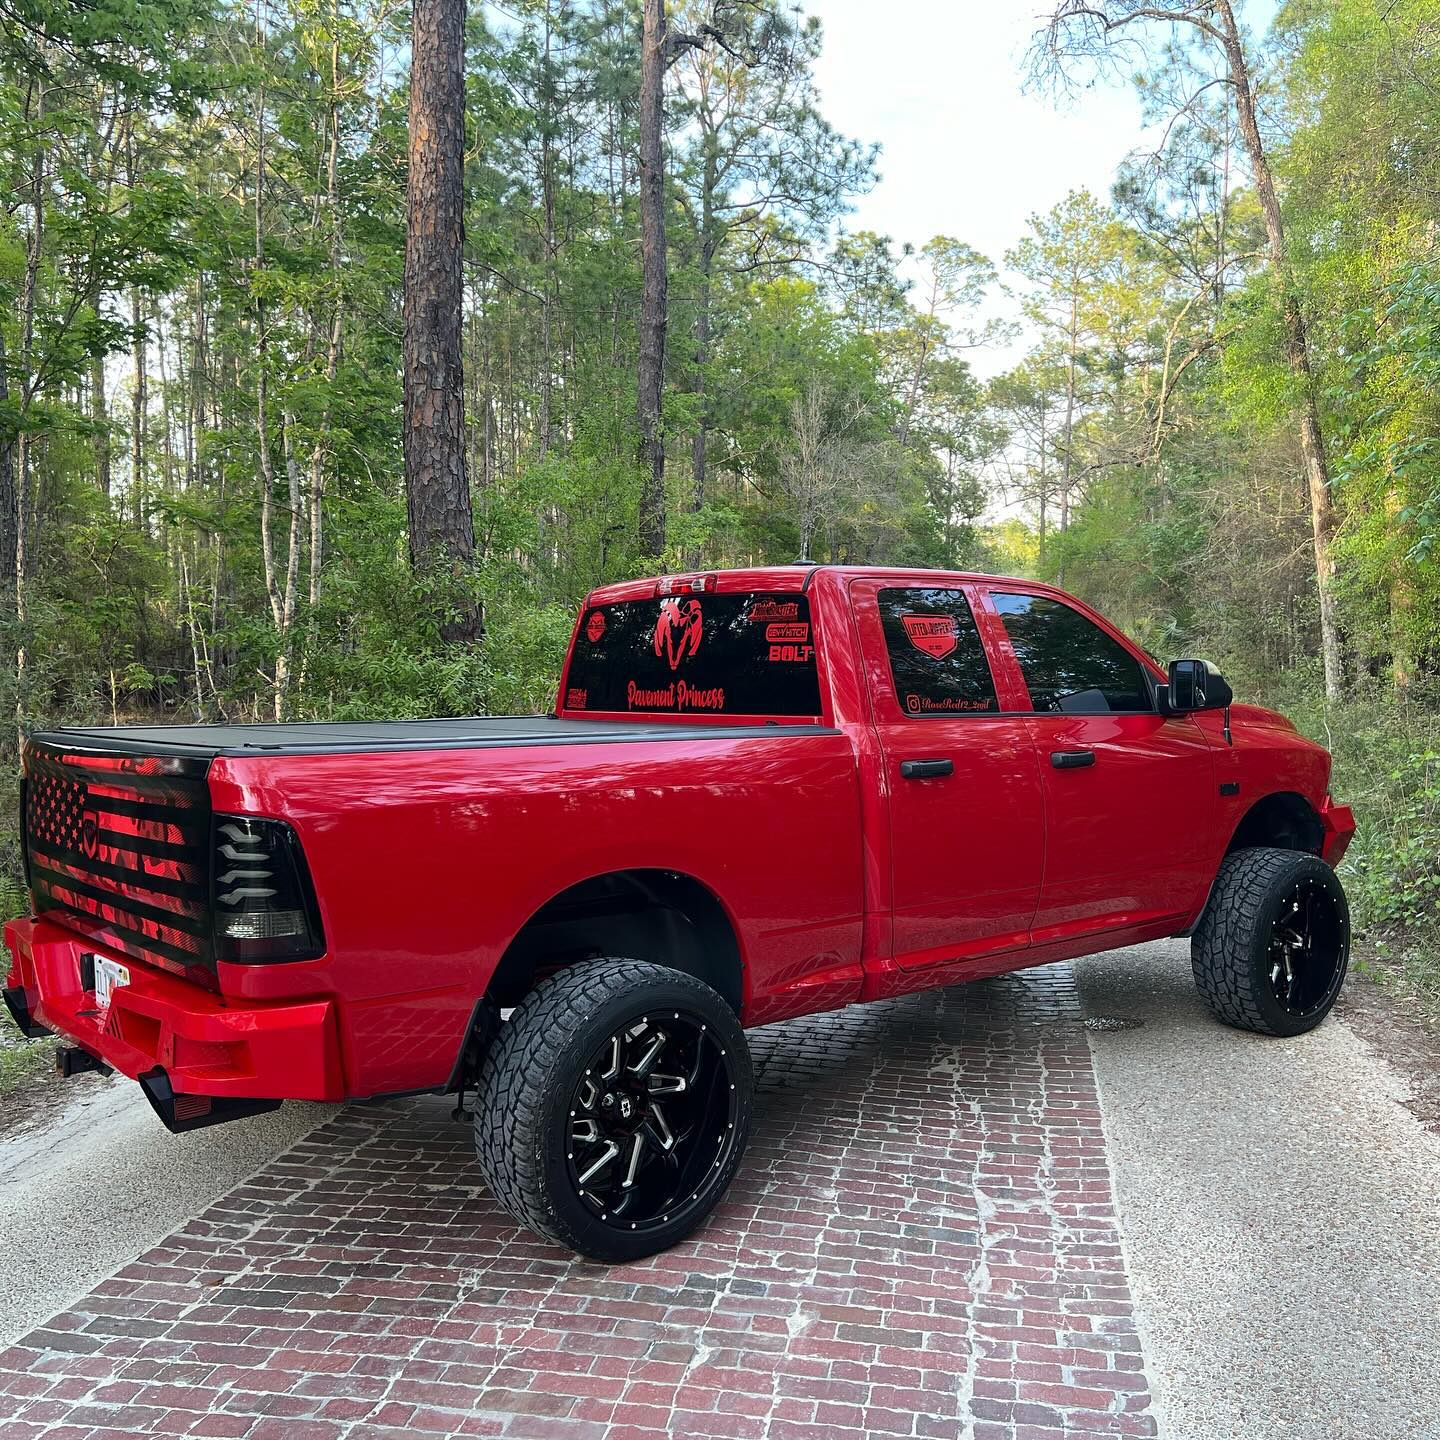 Partially done! Color matching !!! just waiting on the rest of parts to be done! ♥️🔥🔥

#PavementPrincess #Ram #RoughCountry #HornBlaster #VisionWheels #CustomOffsets #TruckPorn #Effenfast #GenYHitch #truespikelugnuts #BoltLock #theskynetteam #skynetflorida #skynet @visionwheel @floridaskynetteam  @theskynetteam @turbodieselbabes @queens_mafia21 @truckbabeapparel

__________SPONSORS___________
@diamonddetailingproducts Code :12_2wd
@hornblasters 
@customoffsets: Link In Bio 
: Referral :12_2wd 
@customoffsetsdaily
@genyhitch 
@boltlock
@turbodieselbabes : 12_2wd15
@truckbabeapparel  12_2wd
@vvashautocare Code: 12_2wd